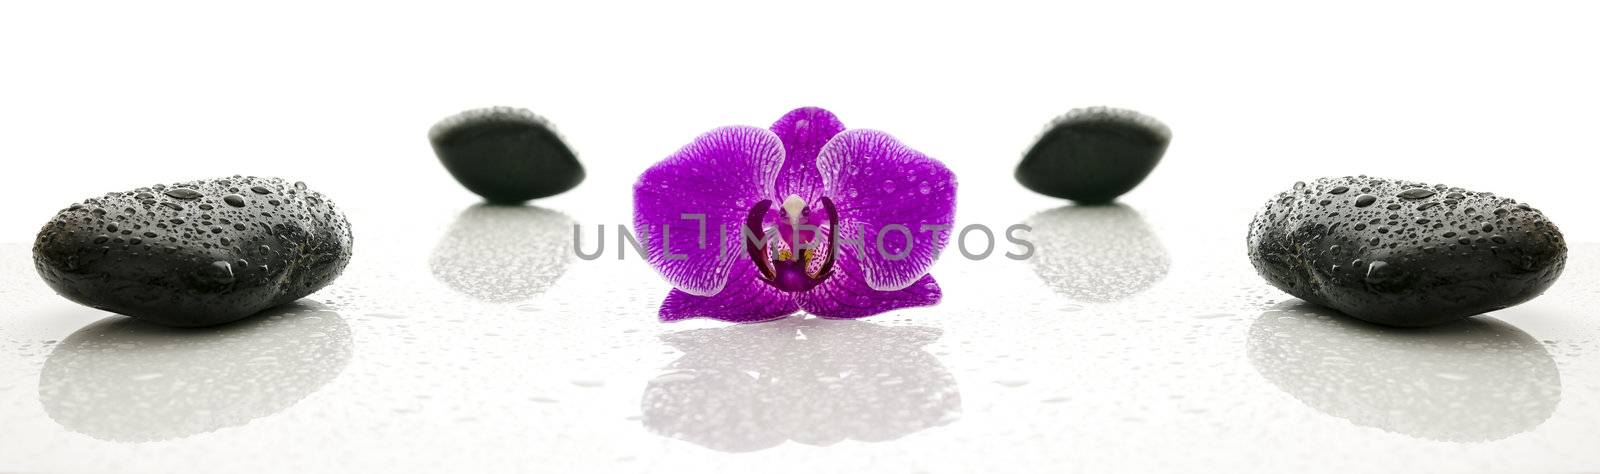 Spa stones and violet orchid flower with water drops representing a wellness concept.